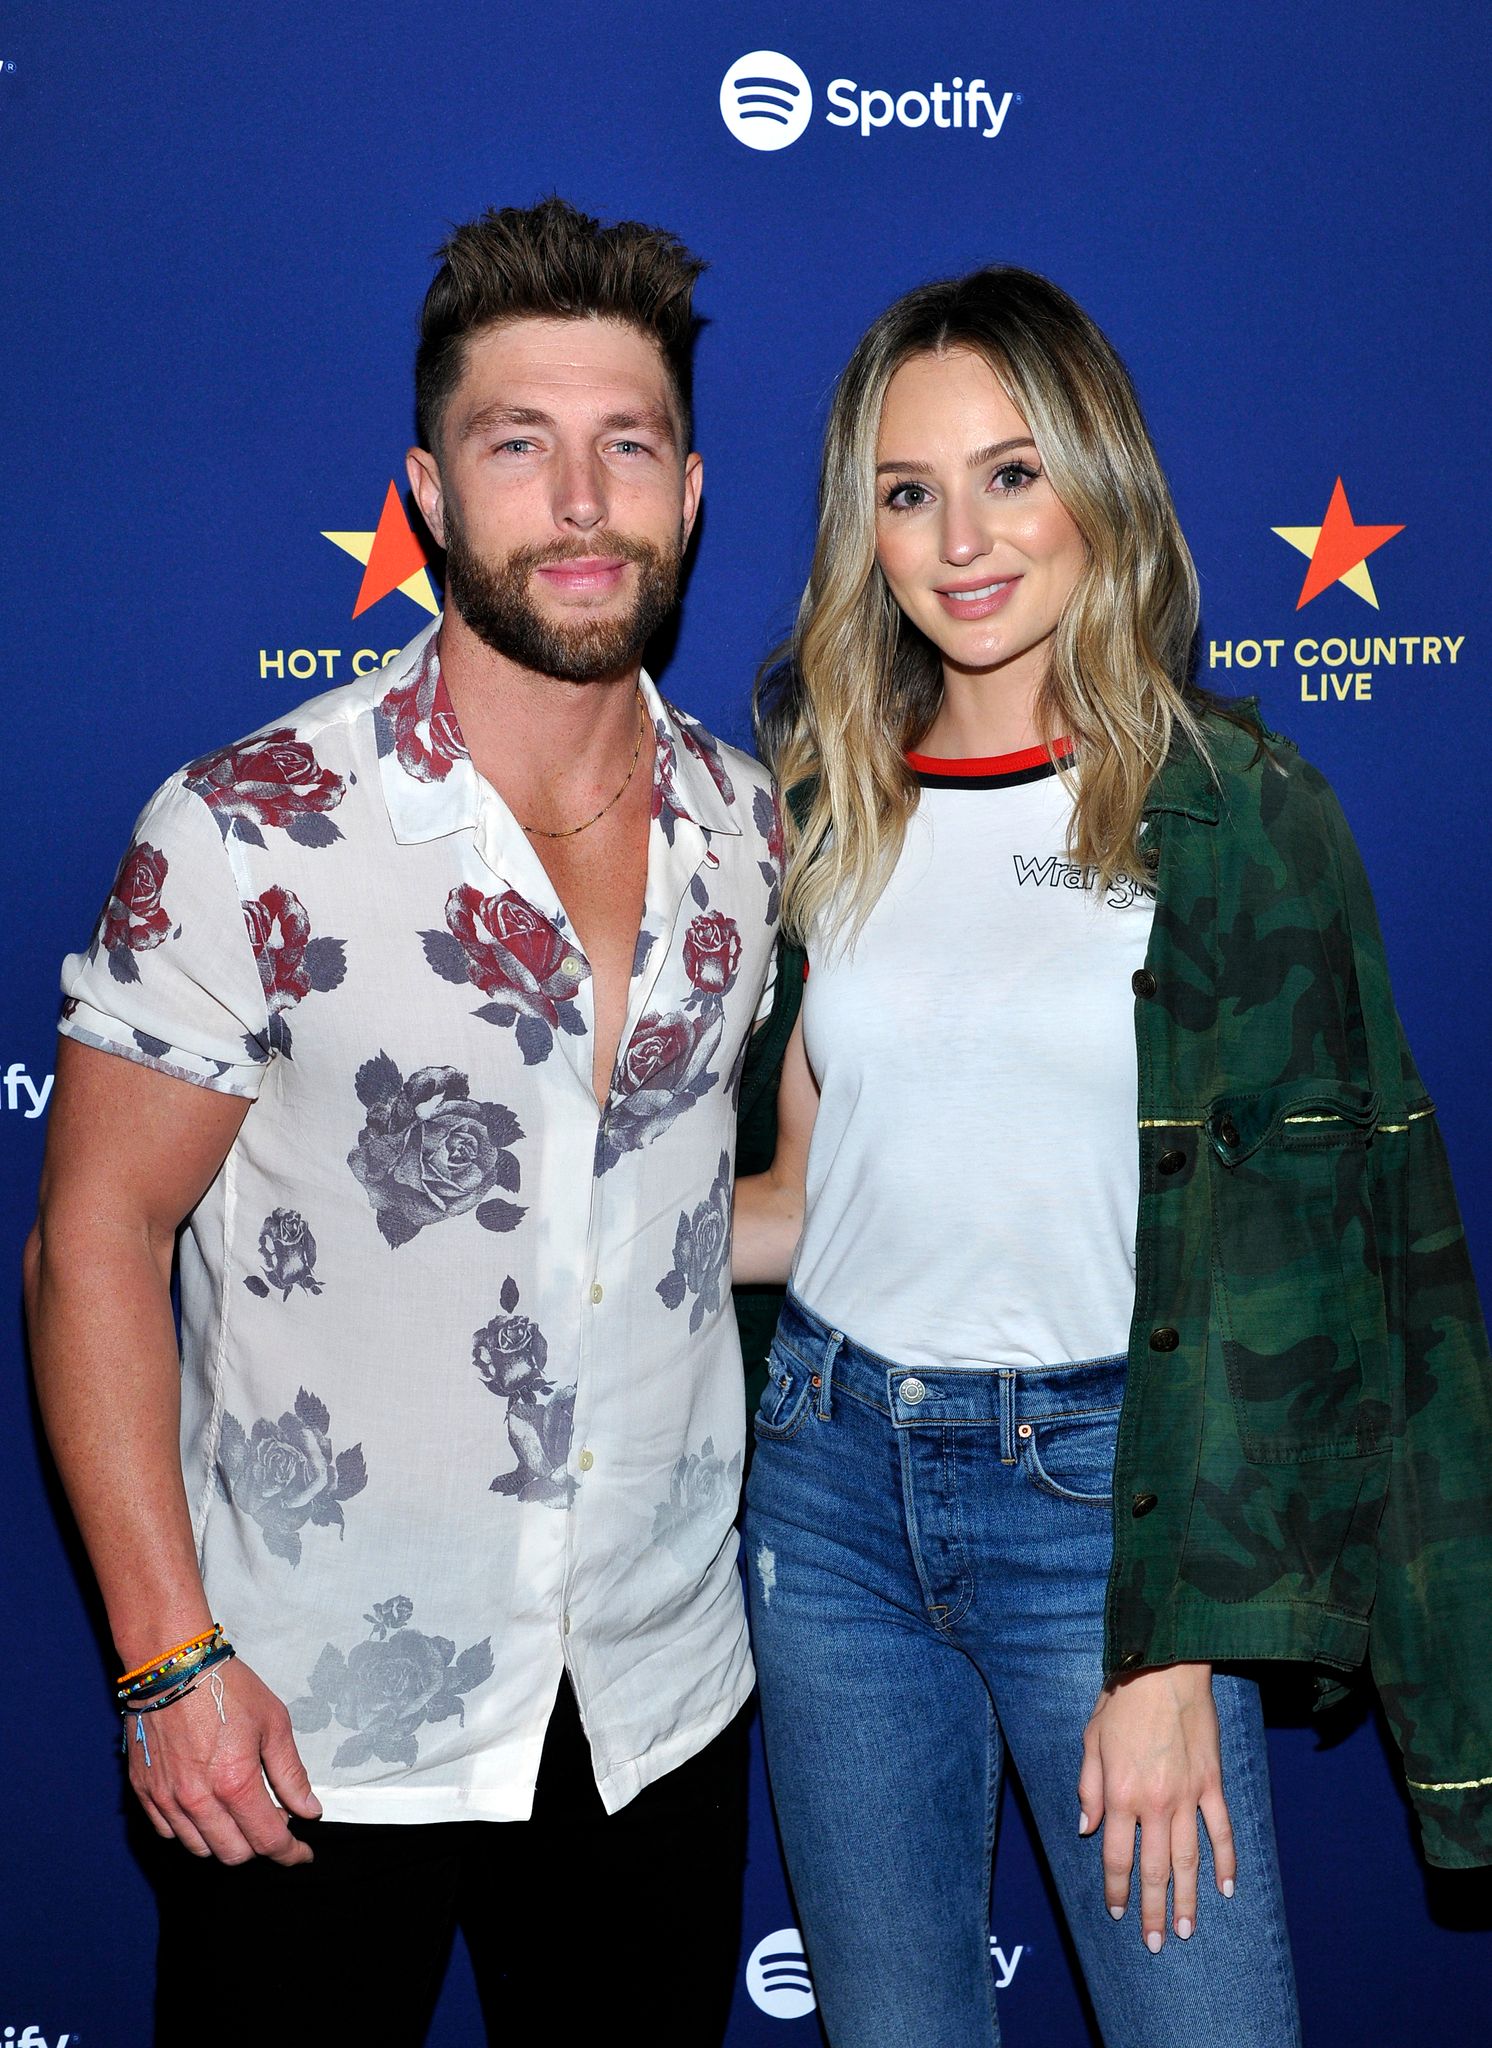 Chris Lane and Lauren Bushnell at Spotify's Hot Country Live Presents Florida Georgia Line in February 2019 in Los Angeles, California | Source: Getty Images